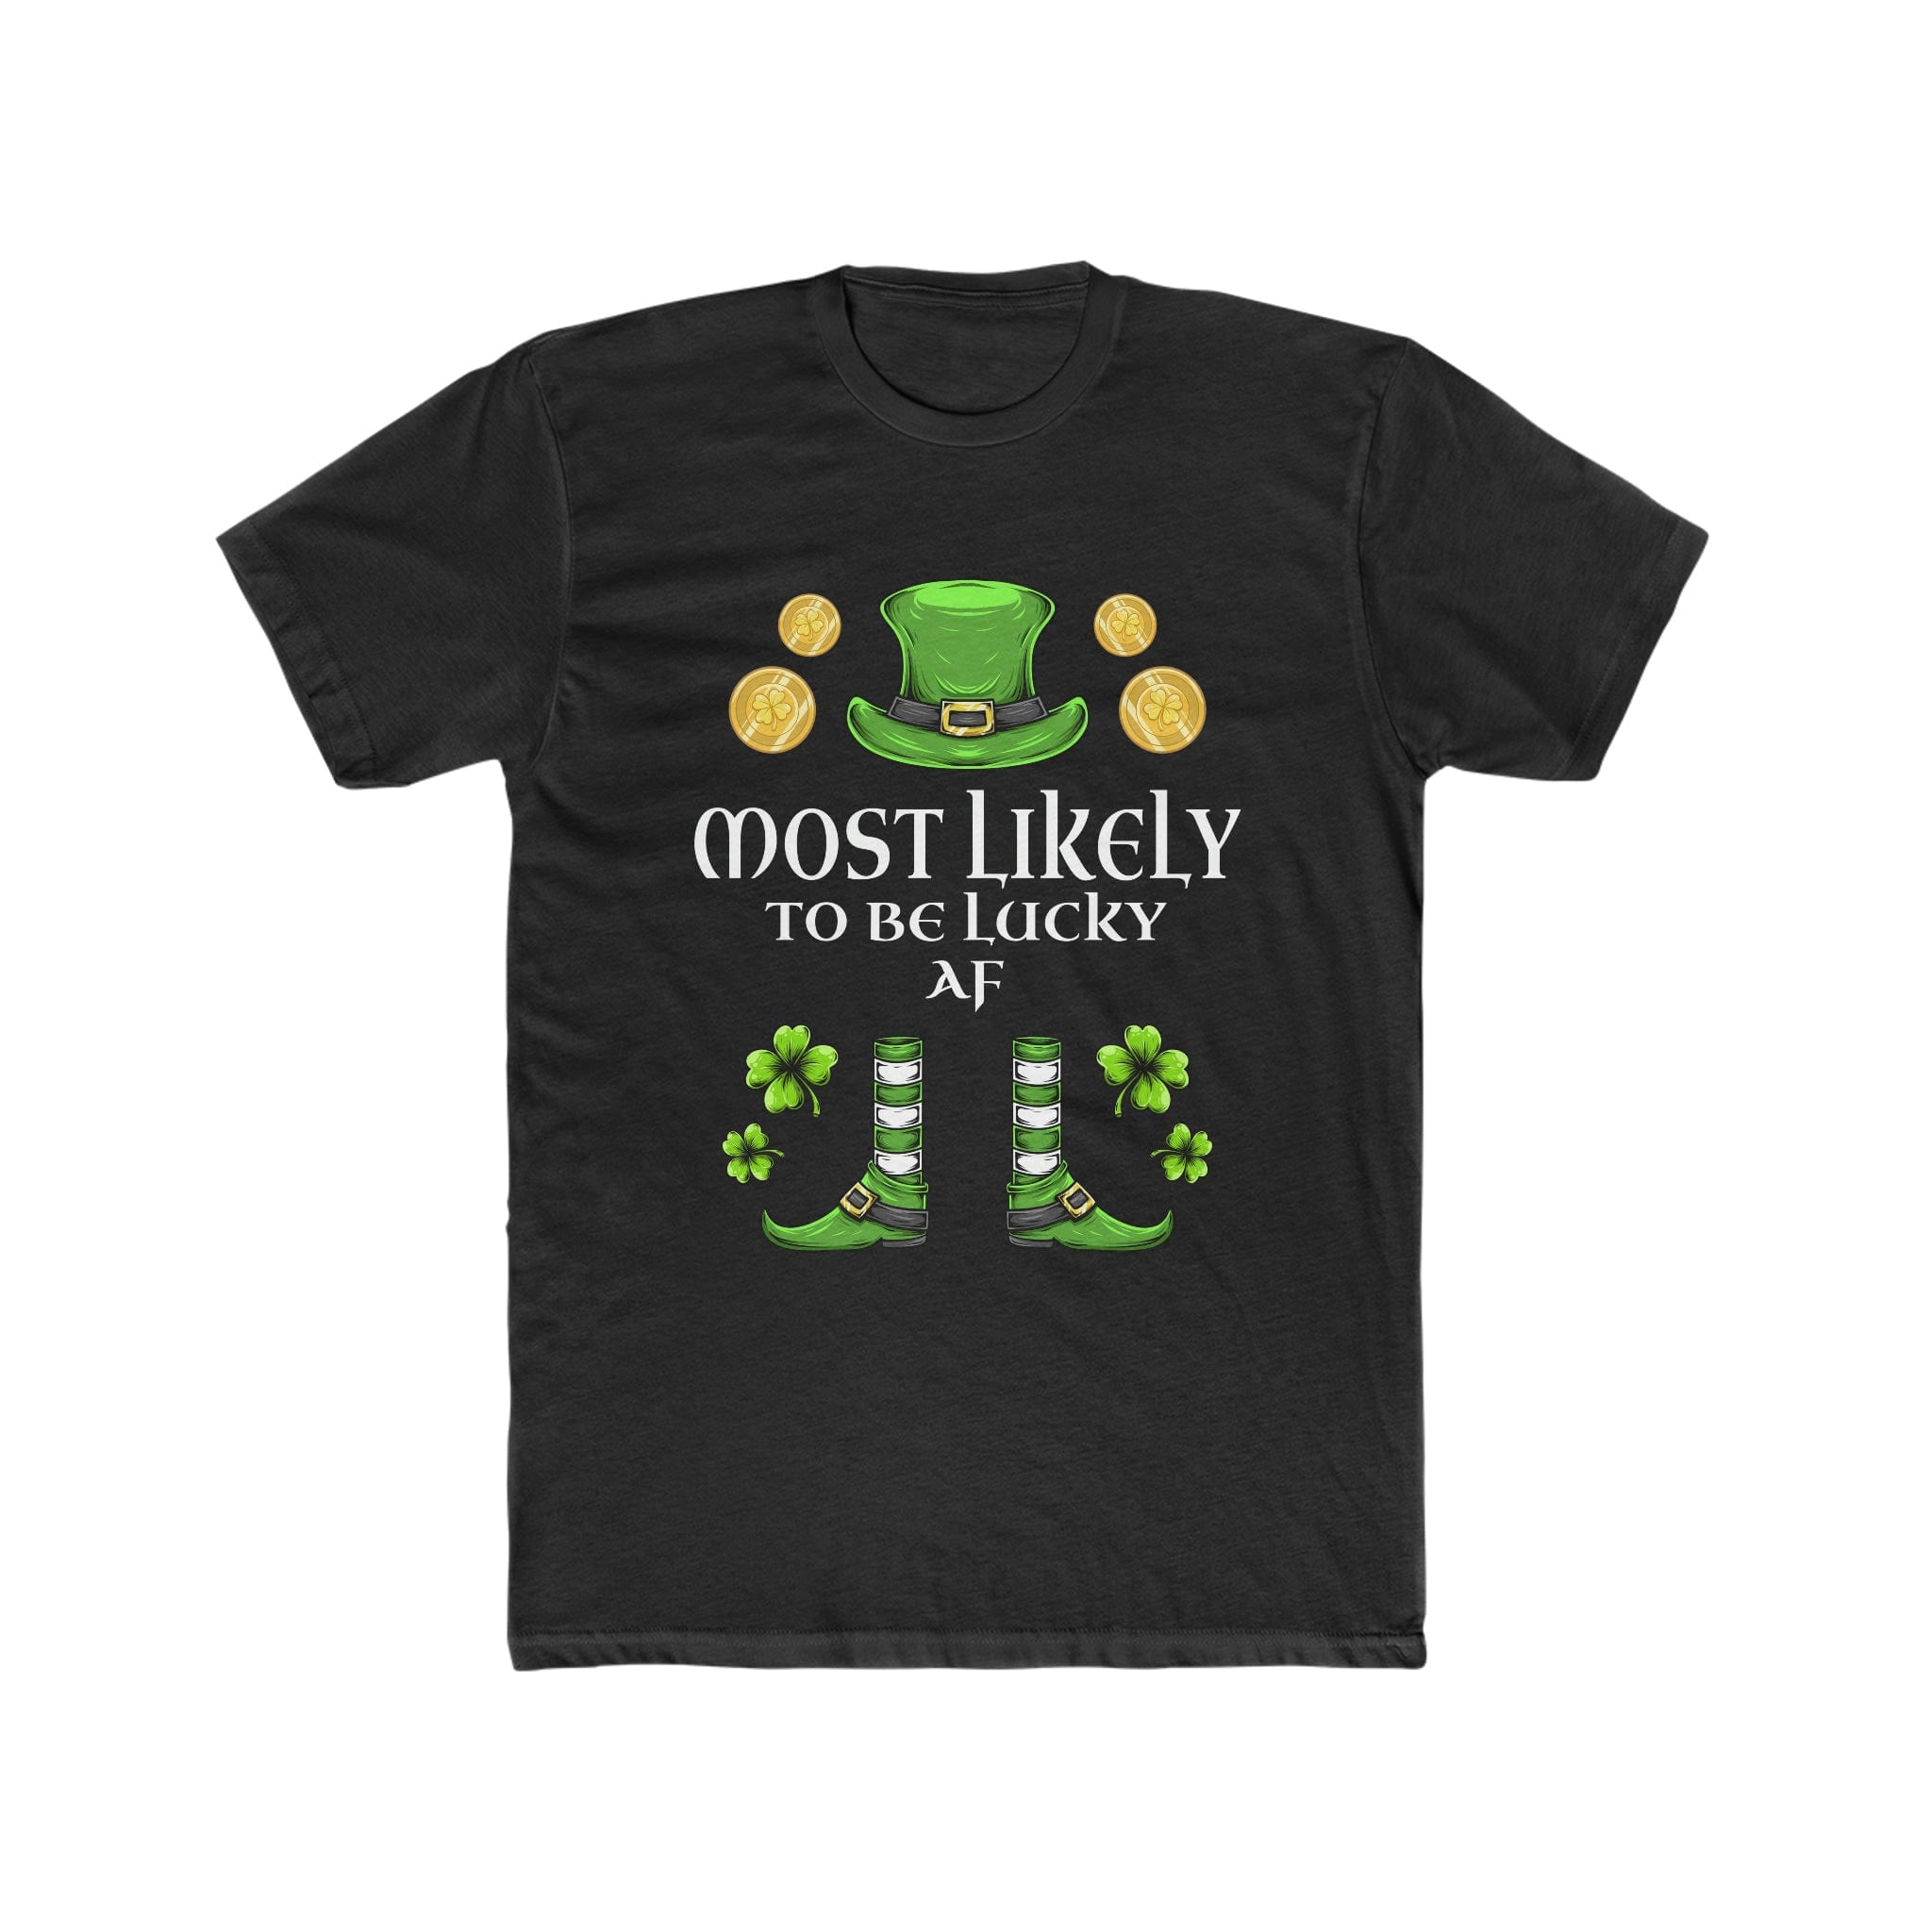 Copy of Most likely to TO BE LUCKY AF Premium Unisex Shirt